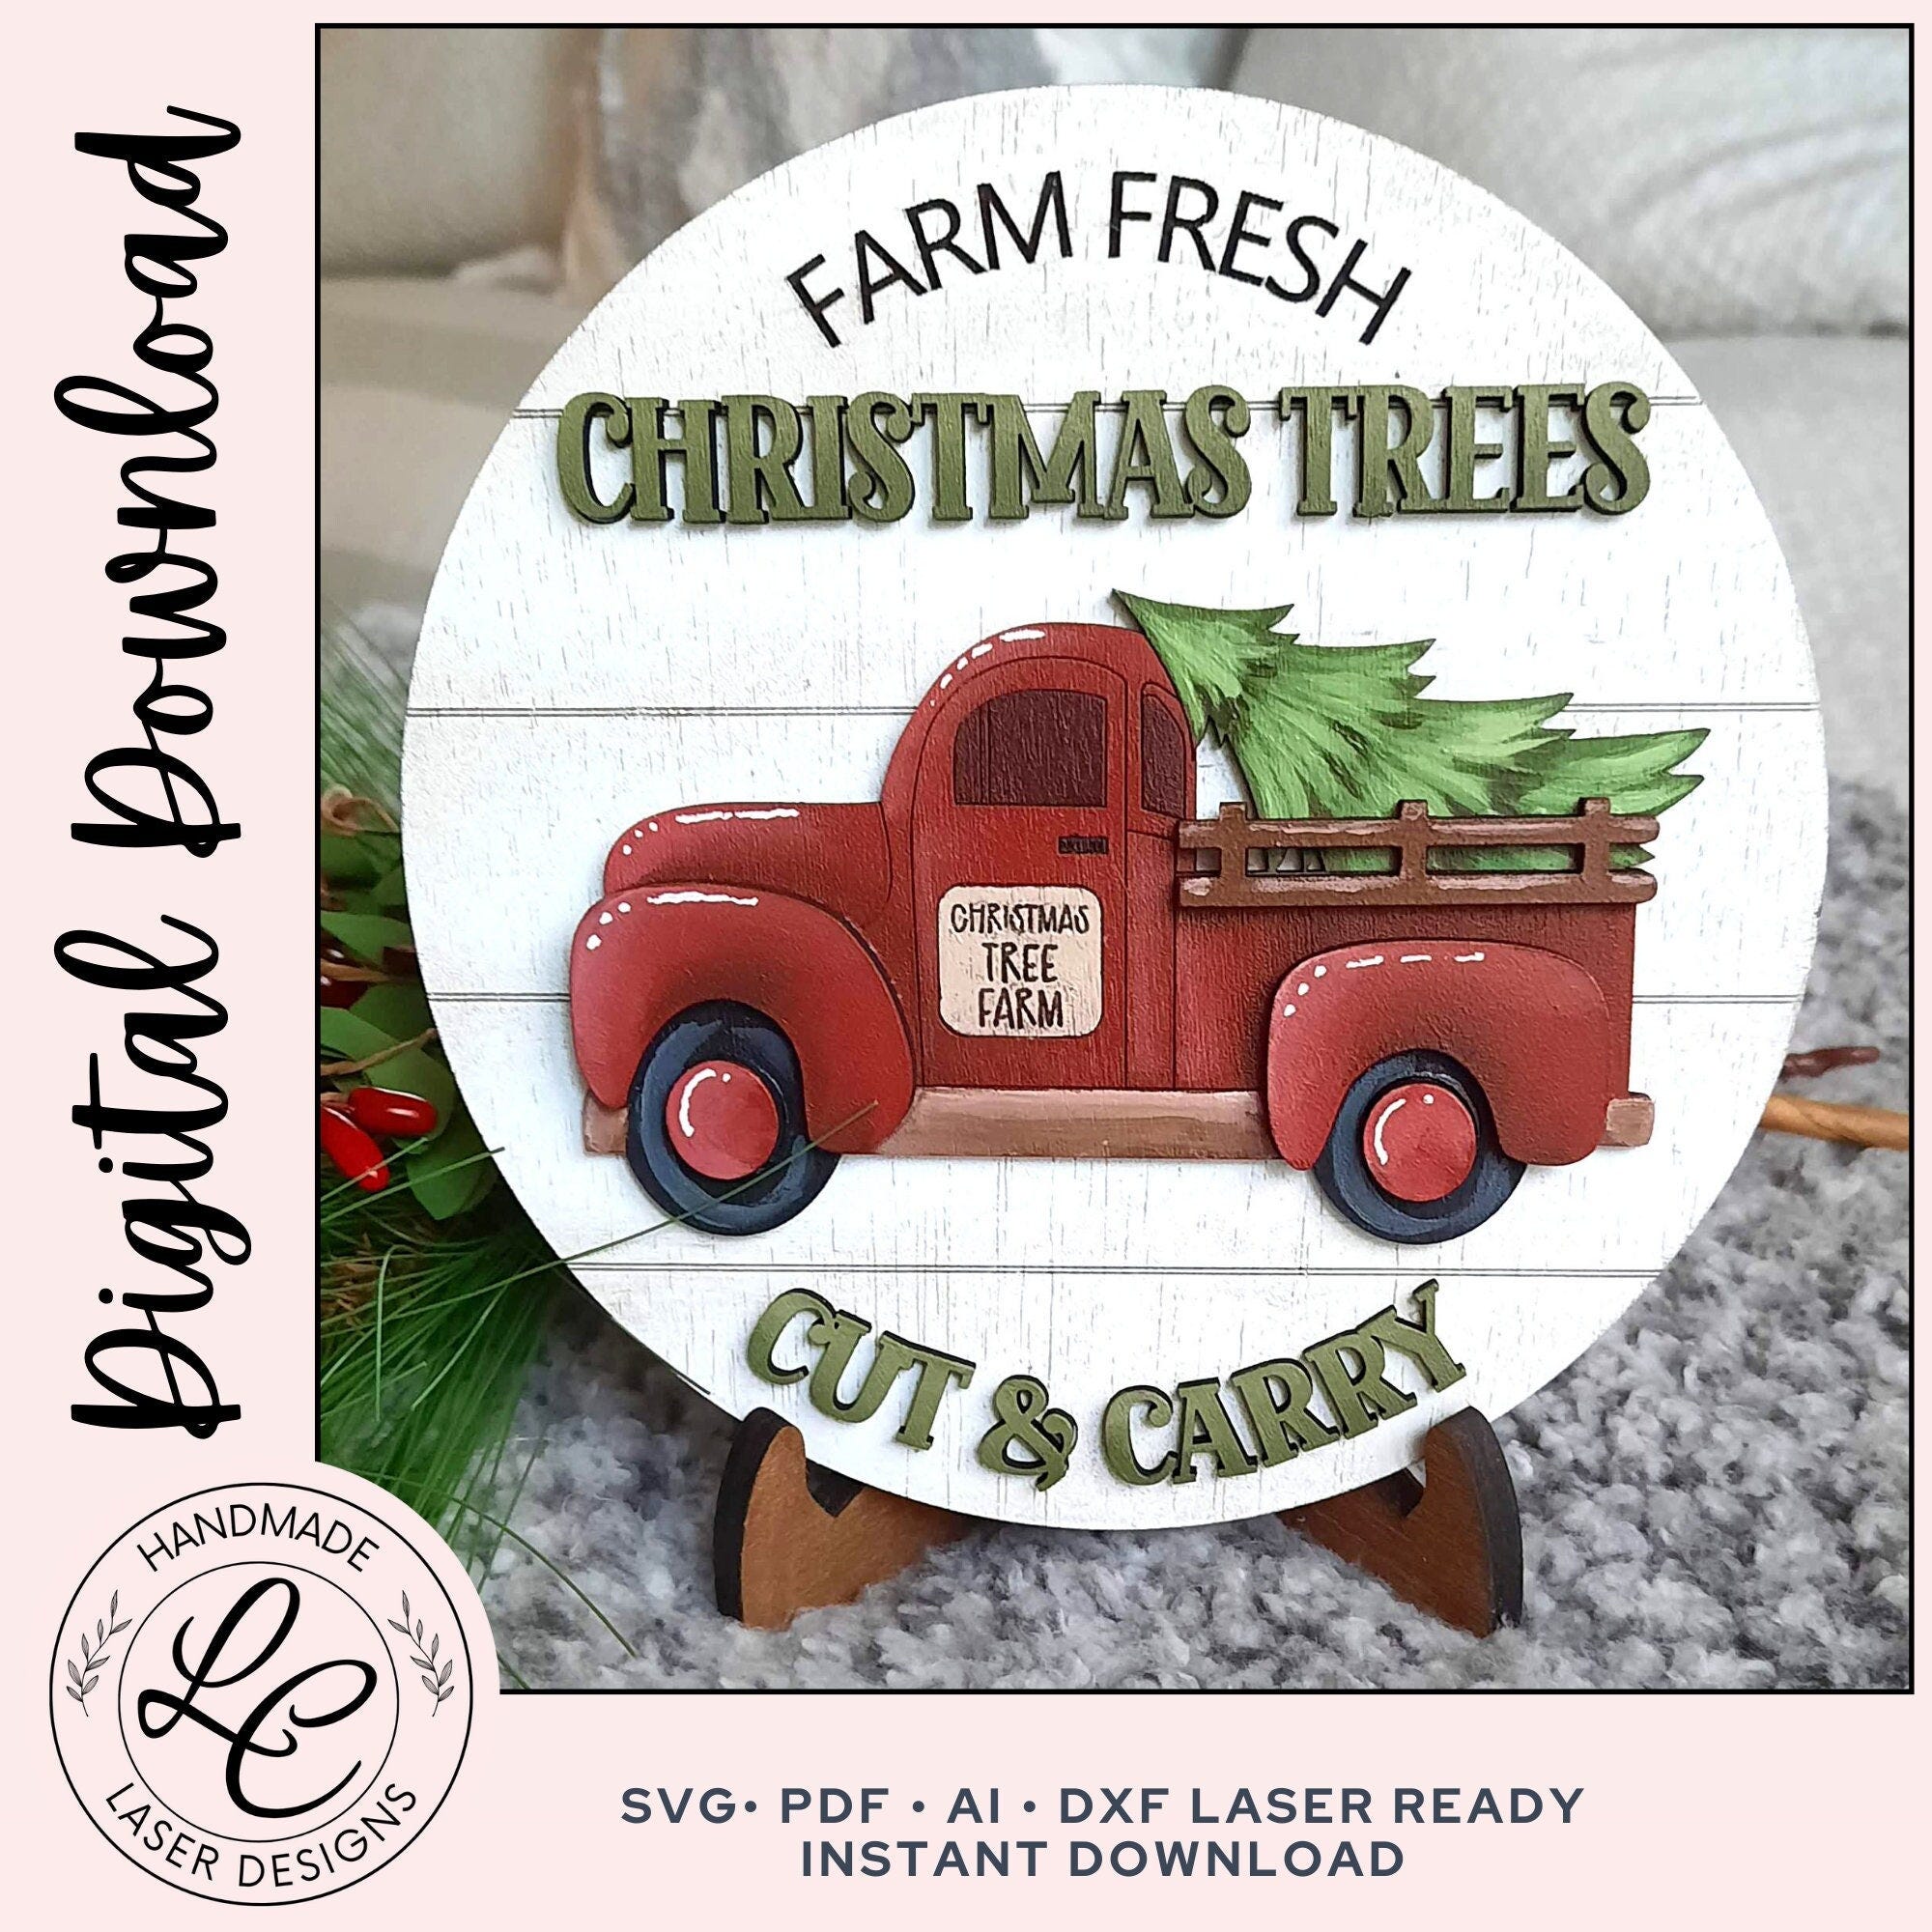 Christmas Vintage Truck Tiered Tray SVG File | Farmhouse Christmas Tree Truck Shelf Sitter SVG | Christmas Sign  | Glowforge Laser Cut File